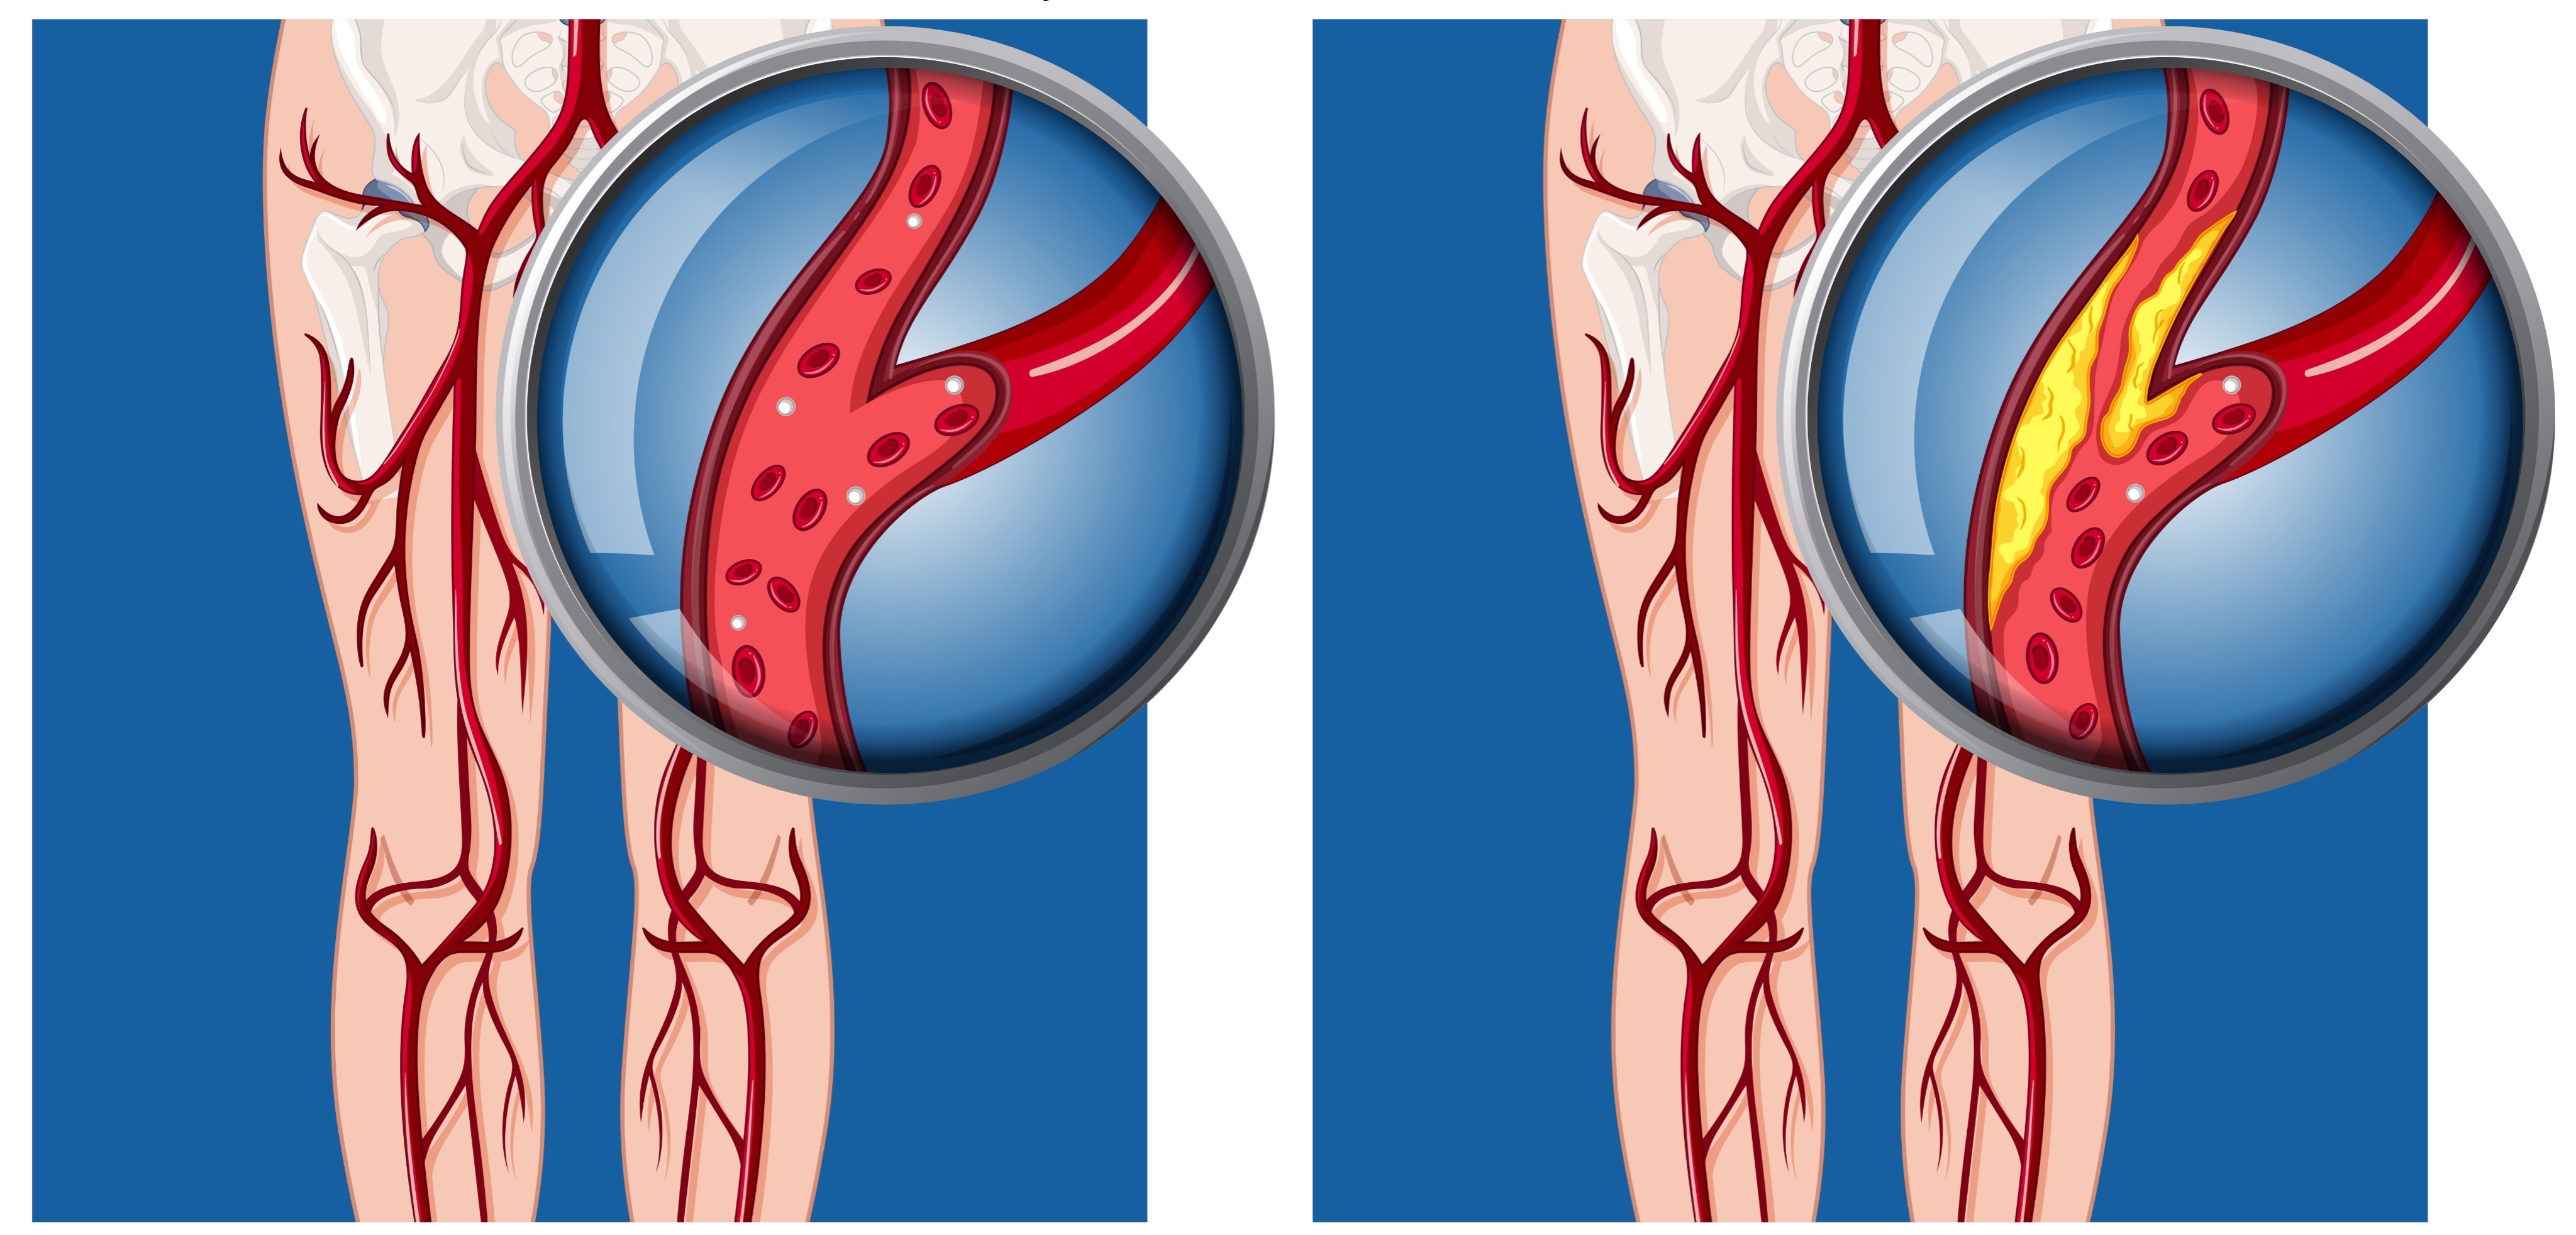 
Lower Extremity Bypass for Peripheral Artery Disease – Indications and What to Expect 